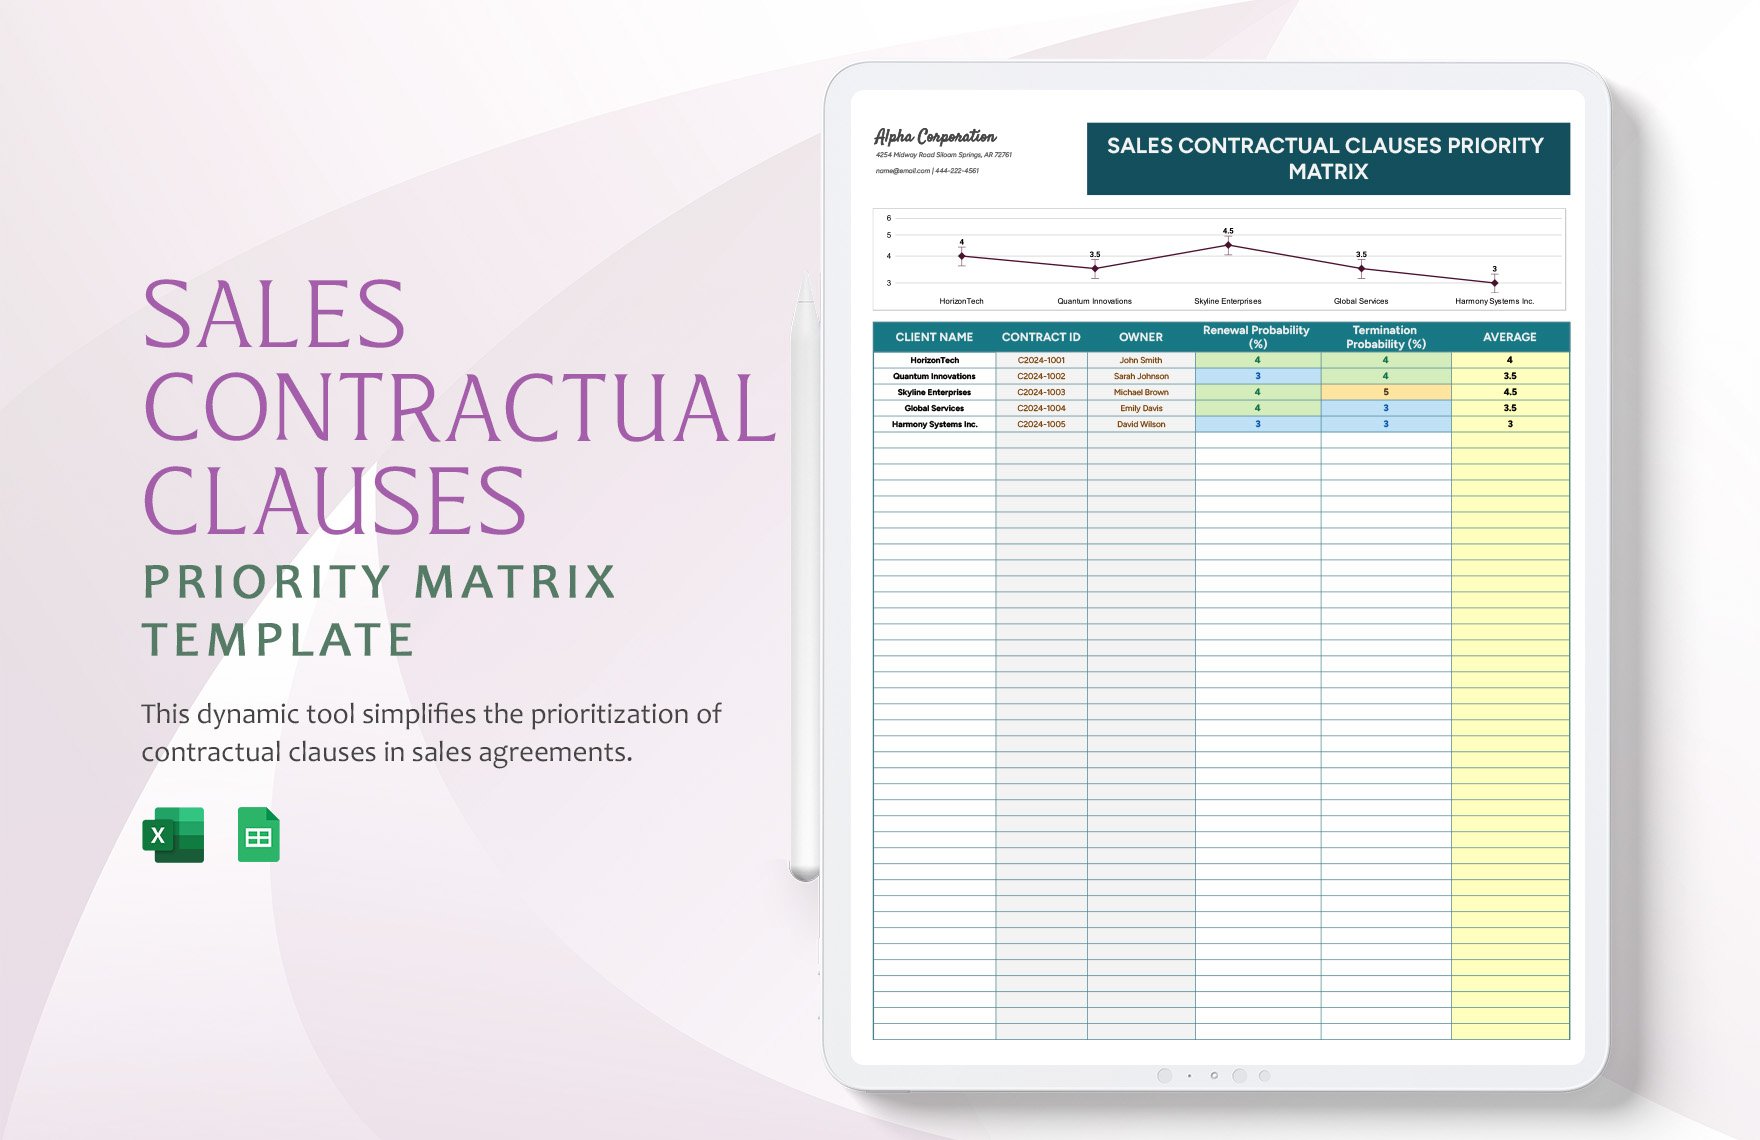 Sales Contractual Clauses Priority Matrix Template in Excel, Google Sheets